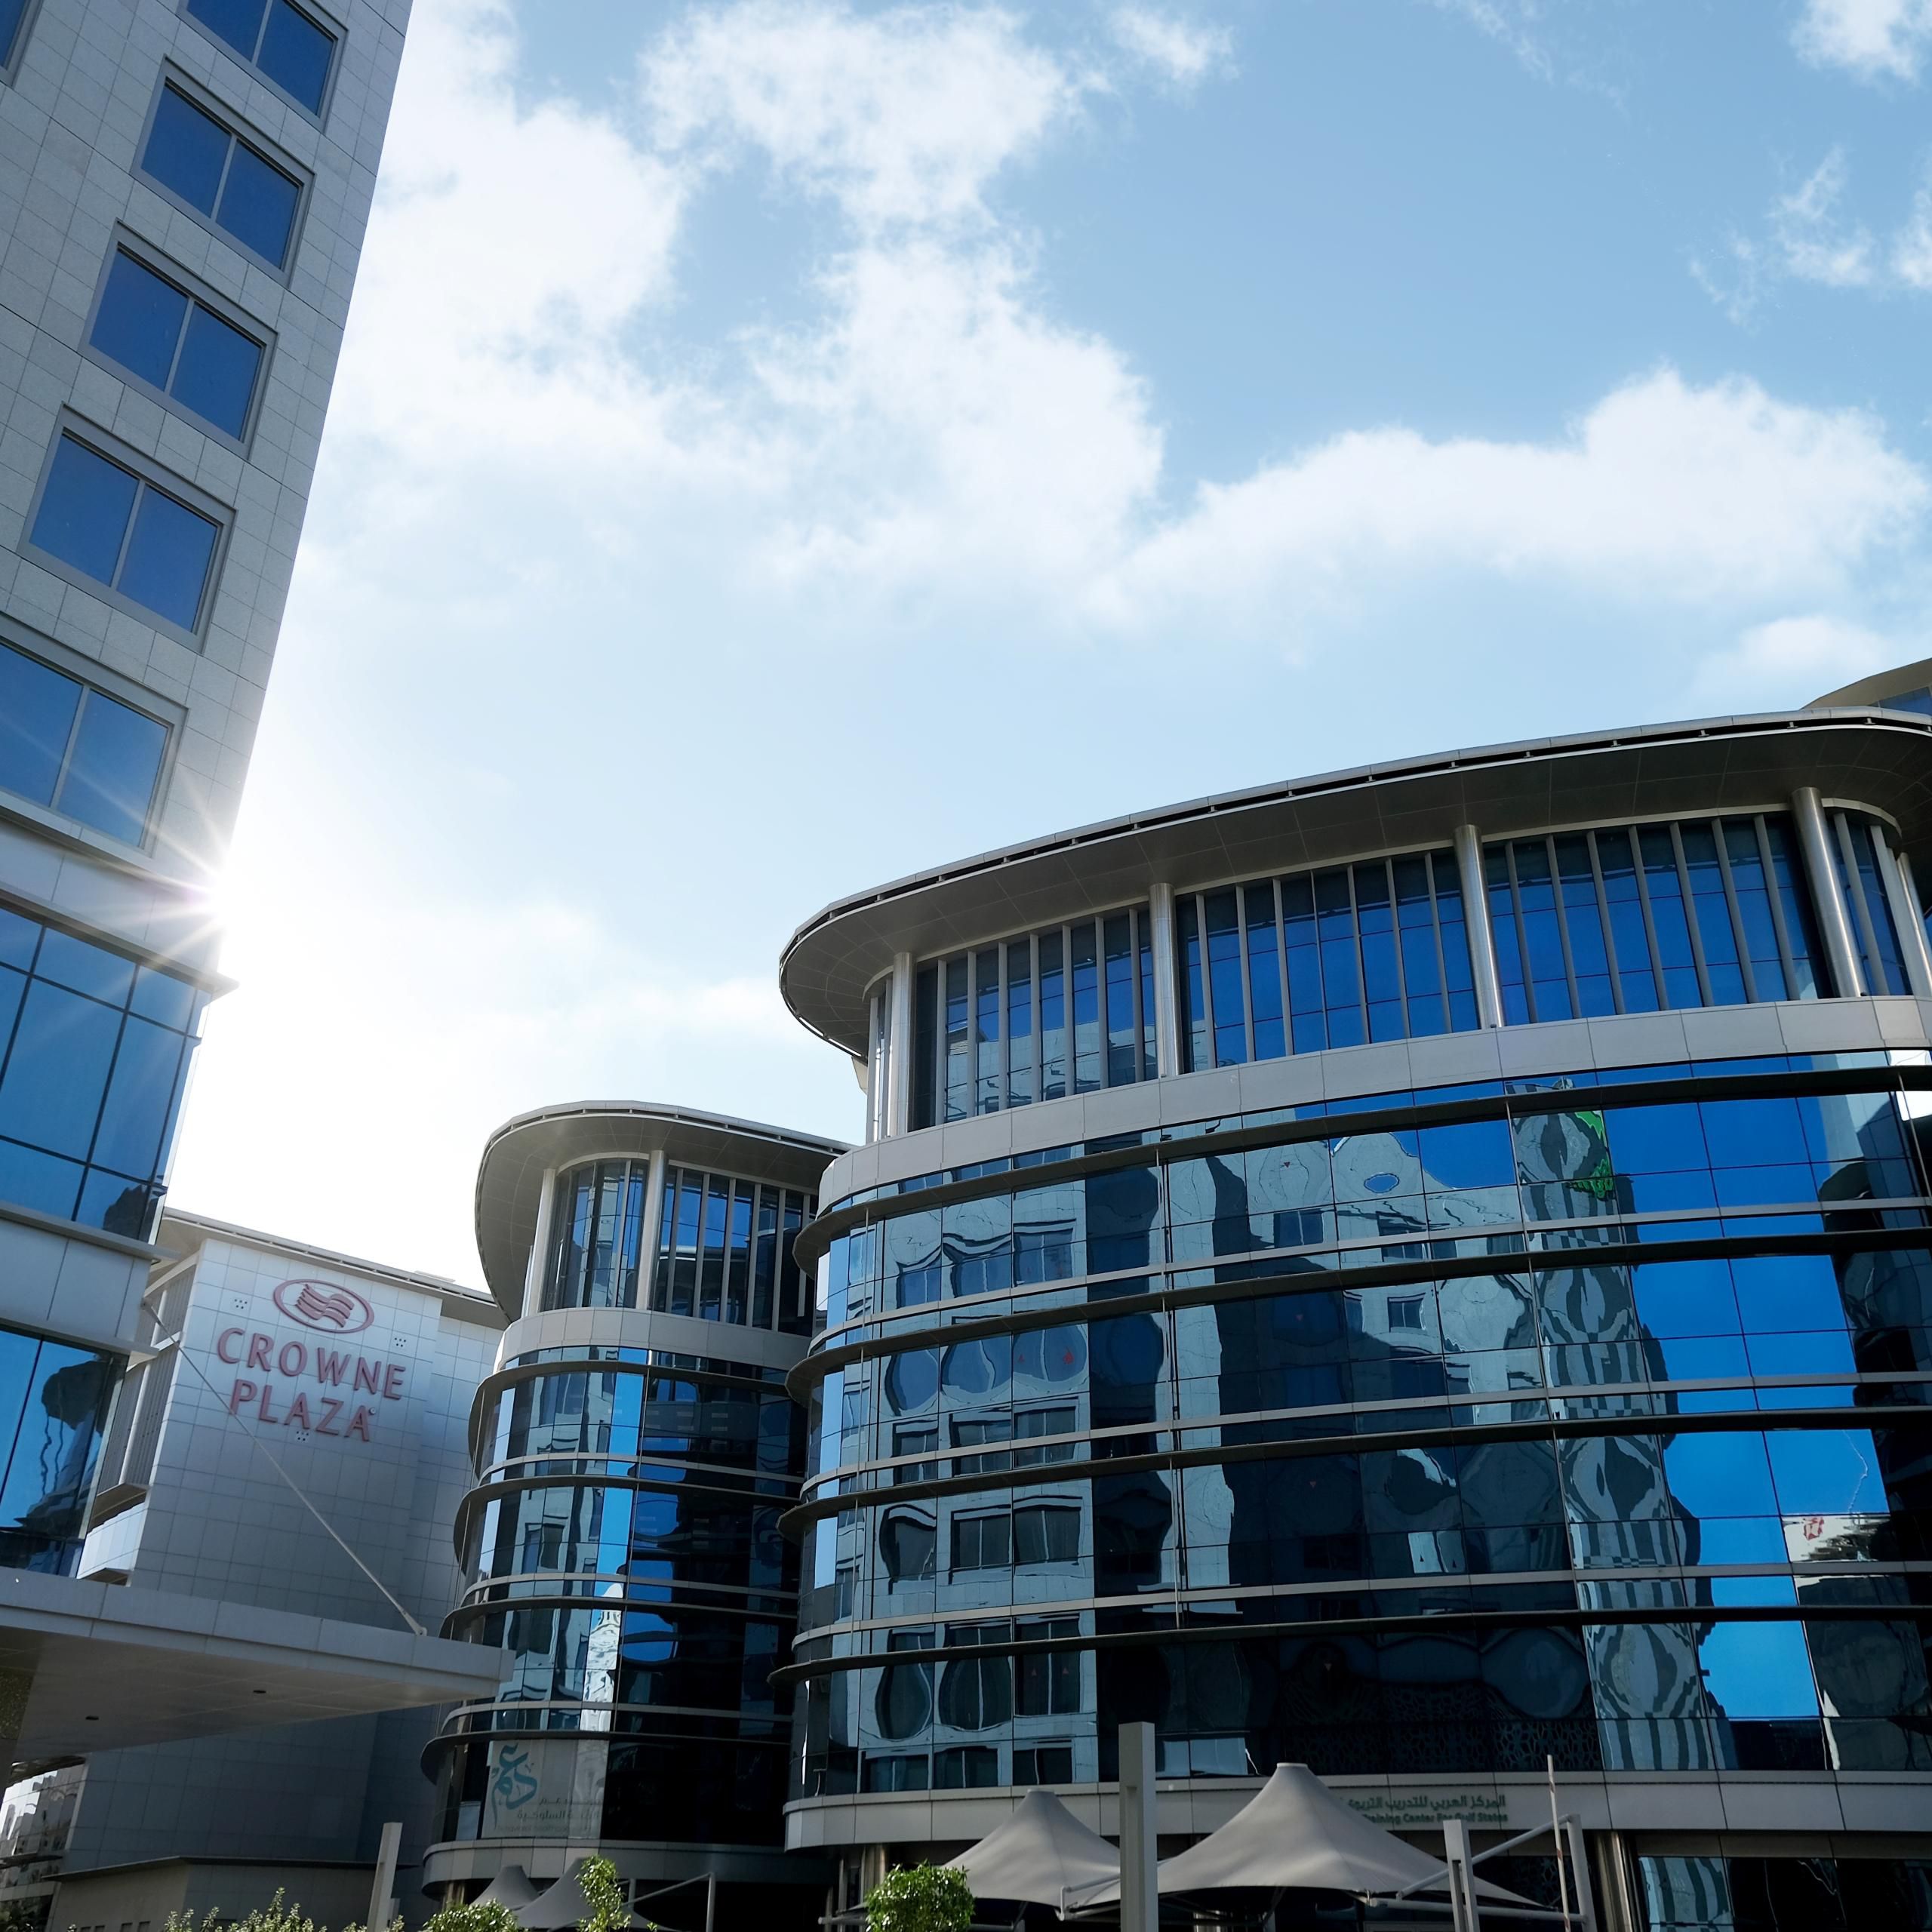 Crowne Plaza Doha is nestled within the vibrant Business Park